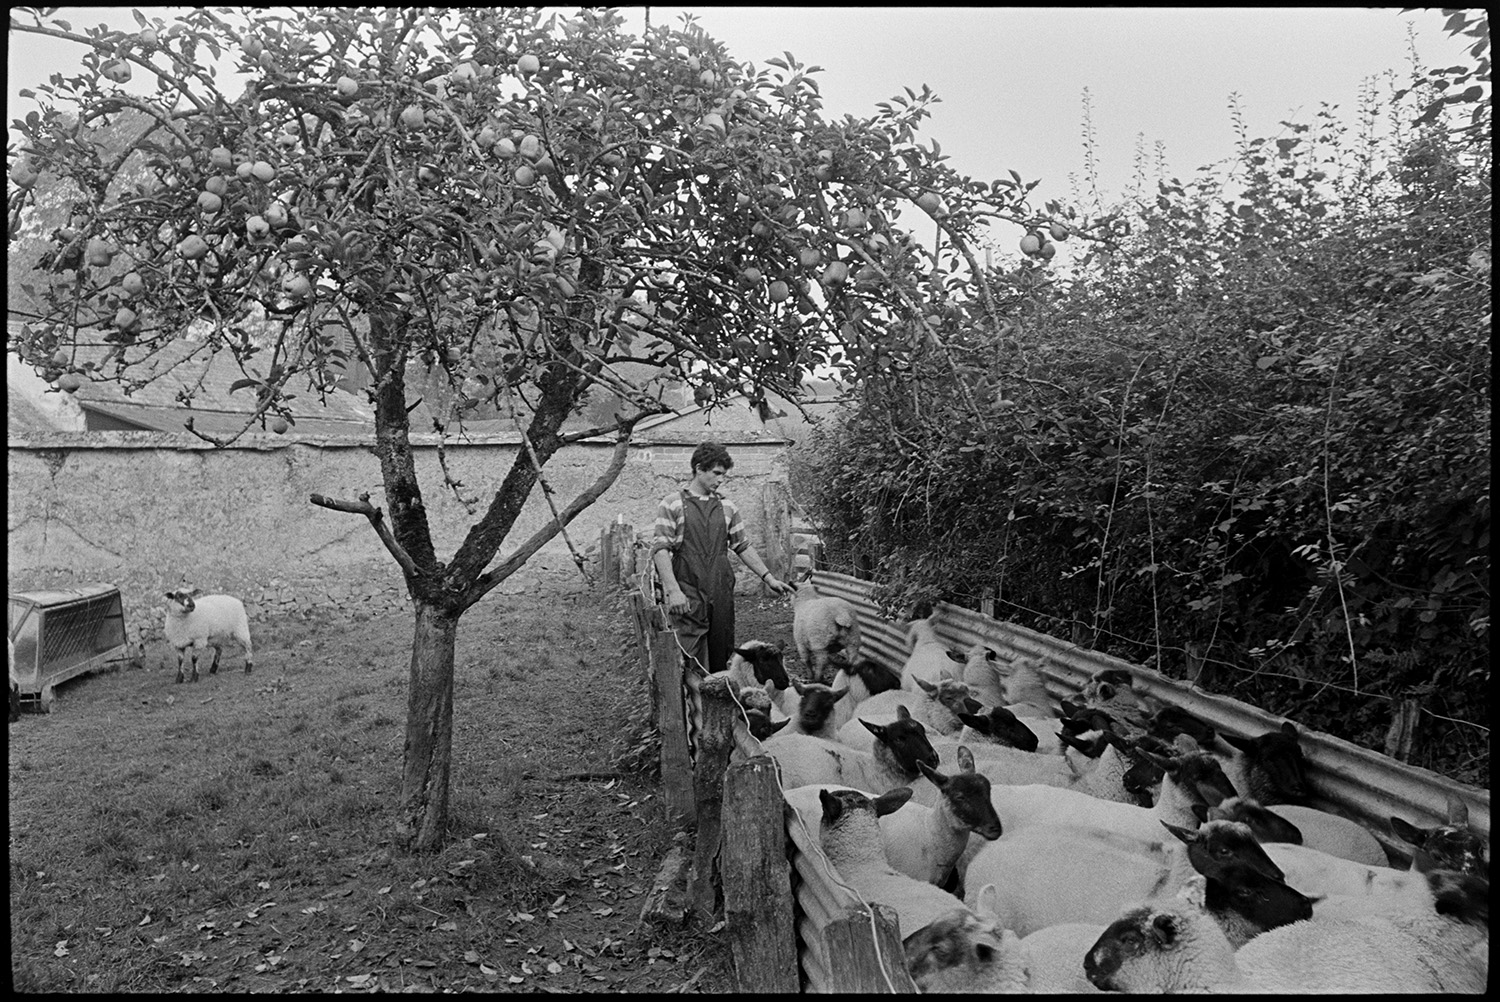 Farmer checking sheep in pen, rams in orchard. 
[Mr Banbury counting sheep in a small pen, made from wooden posts and corrugated iron, running along the edge of a field at Westpark, Iddesleigh. An apple tree and a feeder are in the field and farm buildings are visible in the background.]